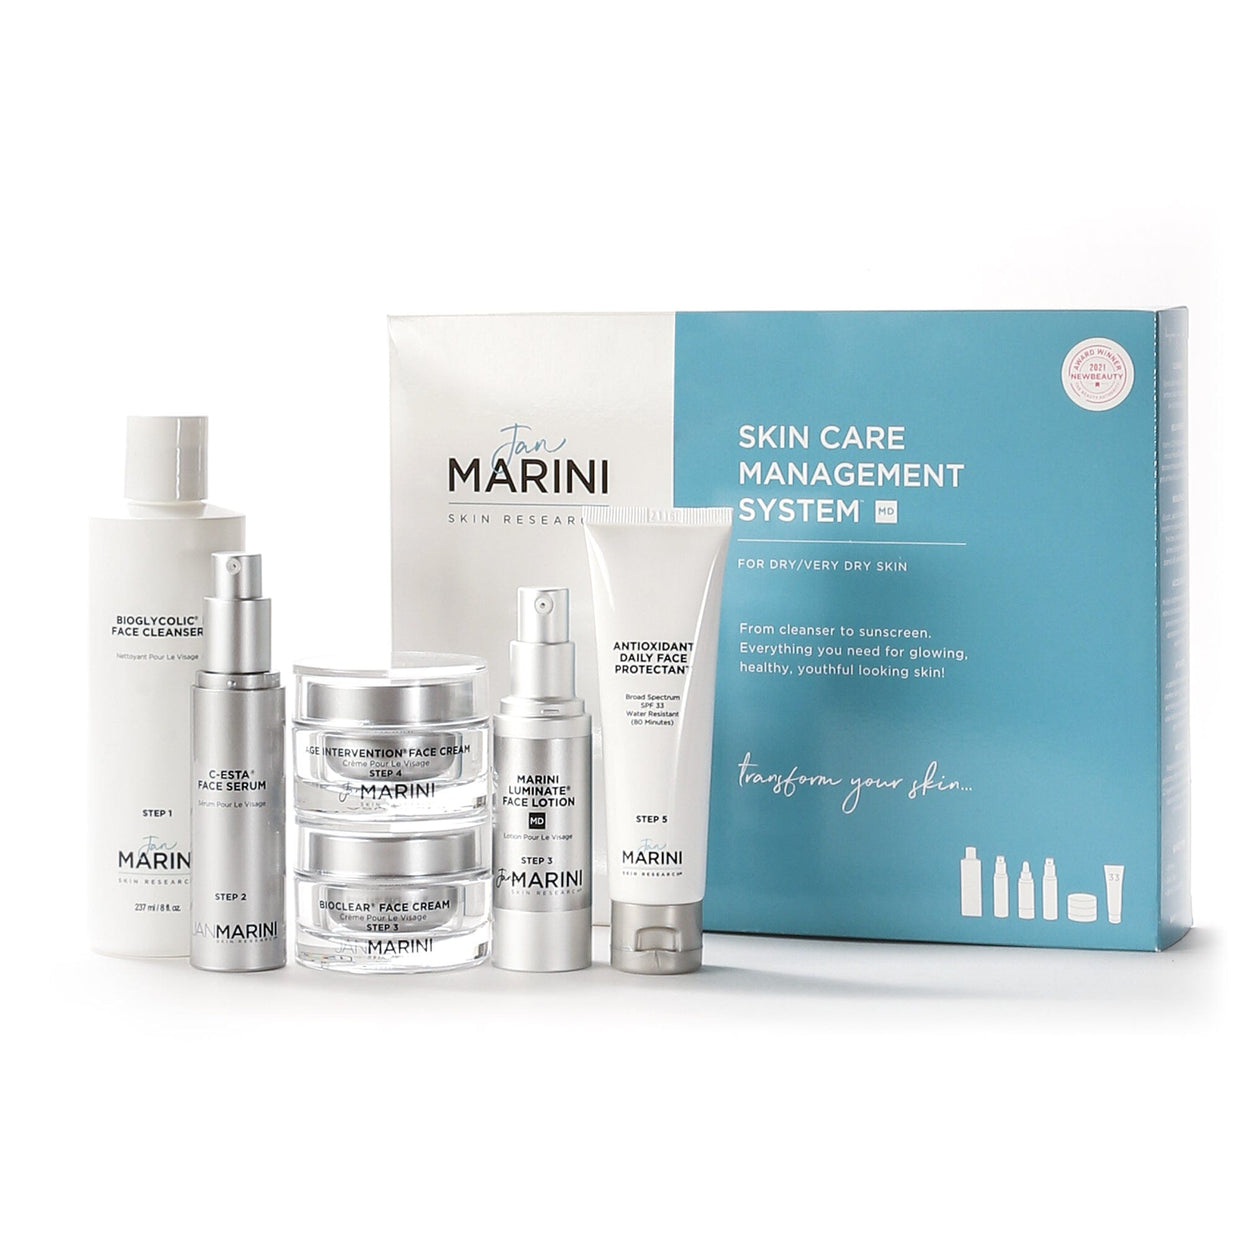 Jan Marini Skin Care Management System MD - Dry/Very Dry Skin with Antioxidant Daily Face Protectant SPF 33 Anti-Aging Skin Care Kits Jan Marini Shop at Exclusive Beauty Club